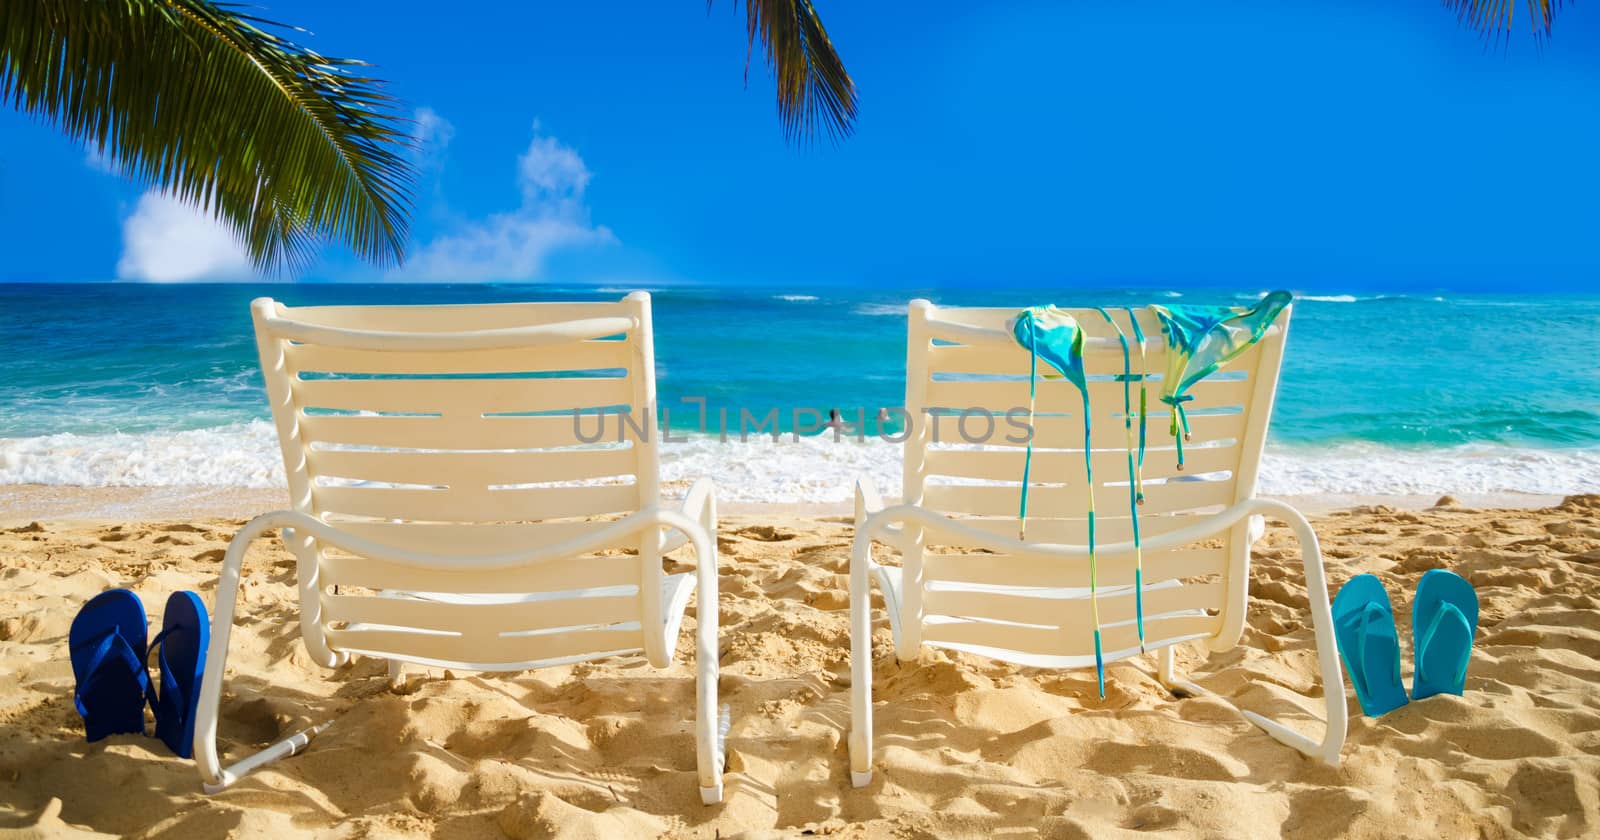 Two white beach chairs under palm leaves by the ocean, with bikini and flip flops and couple in the ocean on background